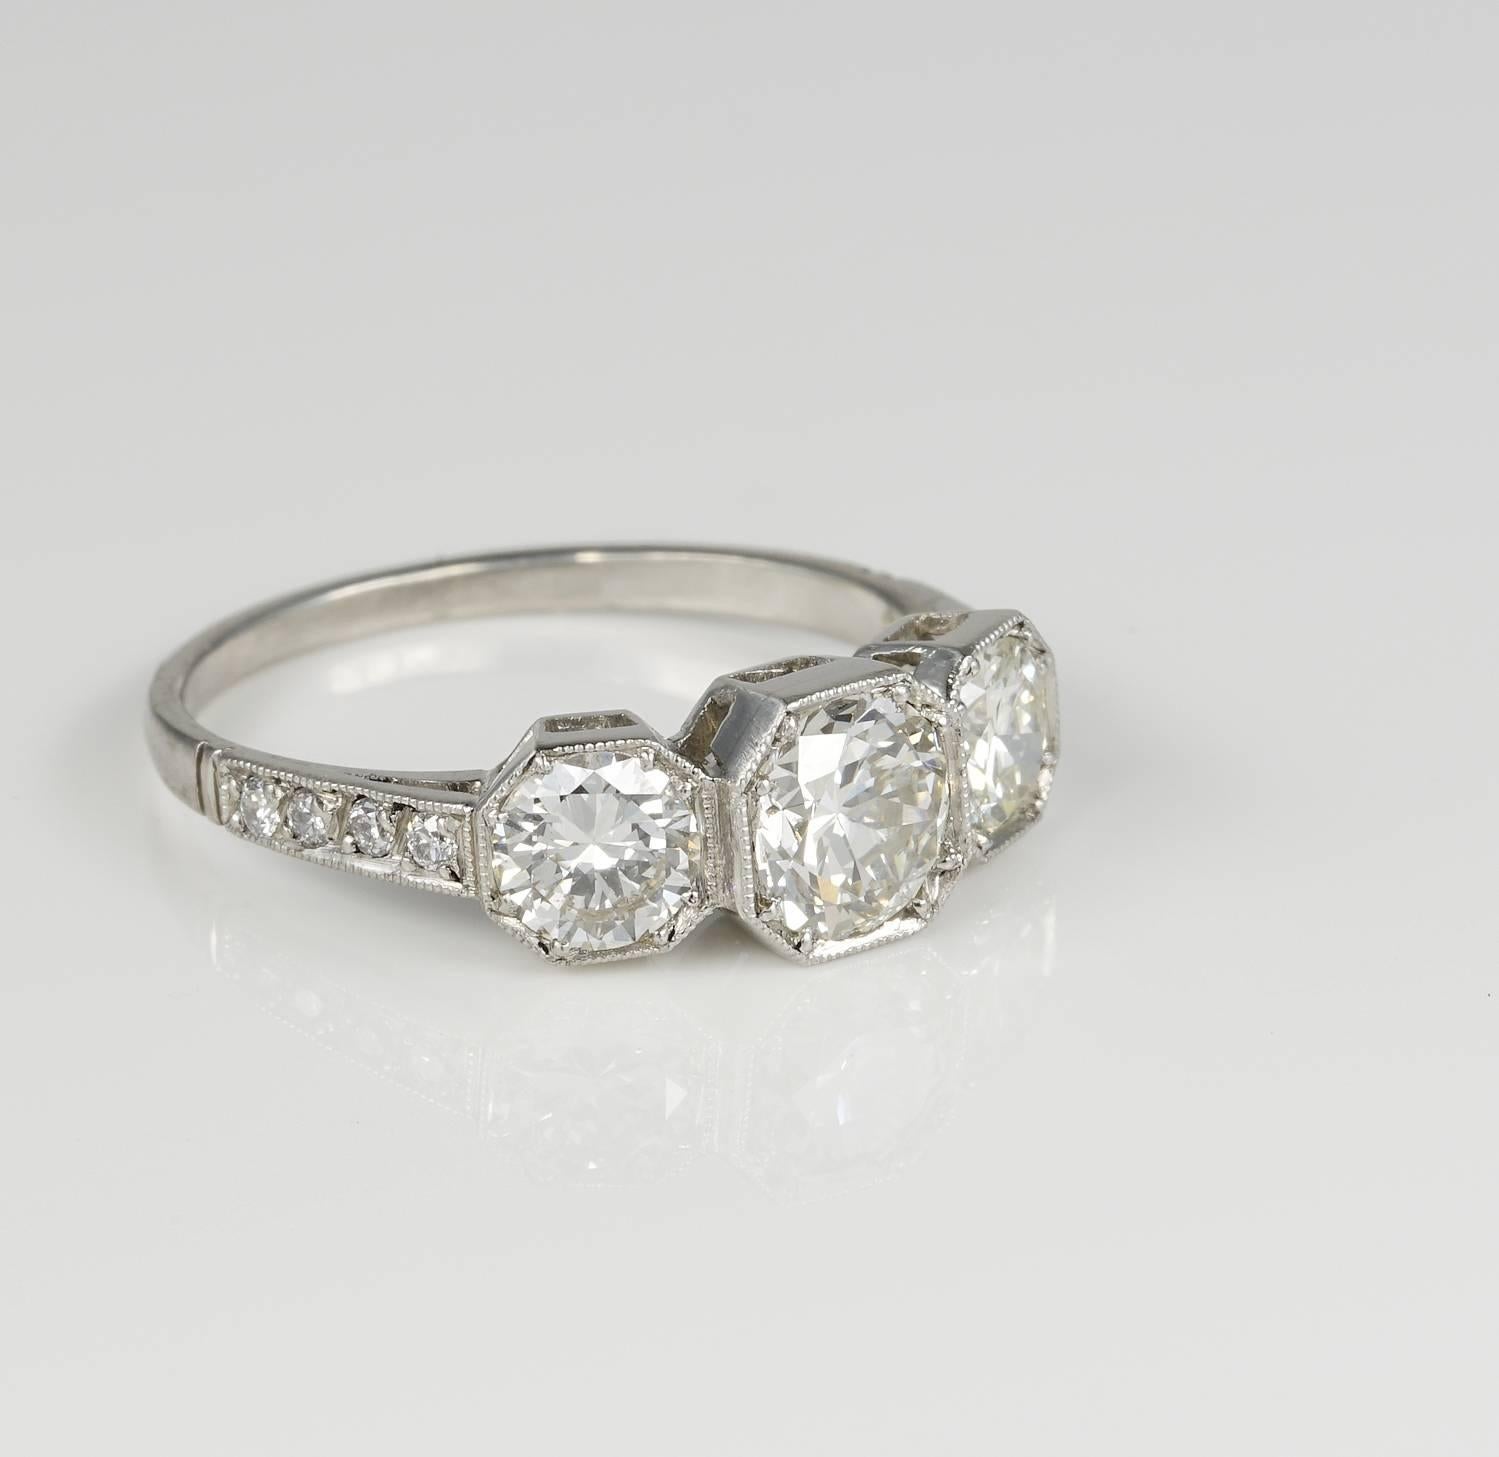 Pure Everlasting Elegance

This absolutely Stunning Art Deco Diamond trilogy ring is one of the most tasteful in design and well crafted trilogy ring you can wish for
Sleek Art Deco all superbly hand crafted of solid Platinum – not marked - however